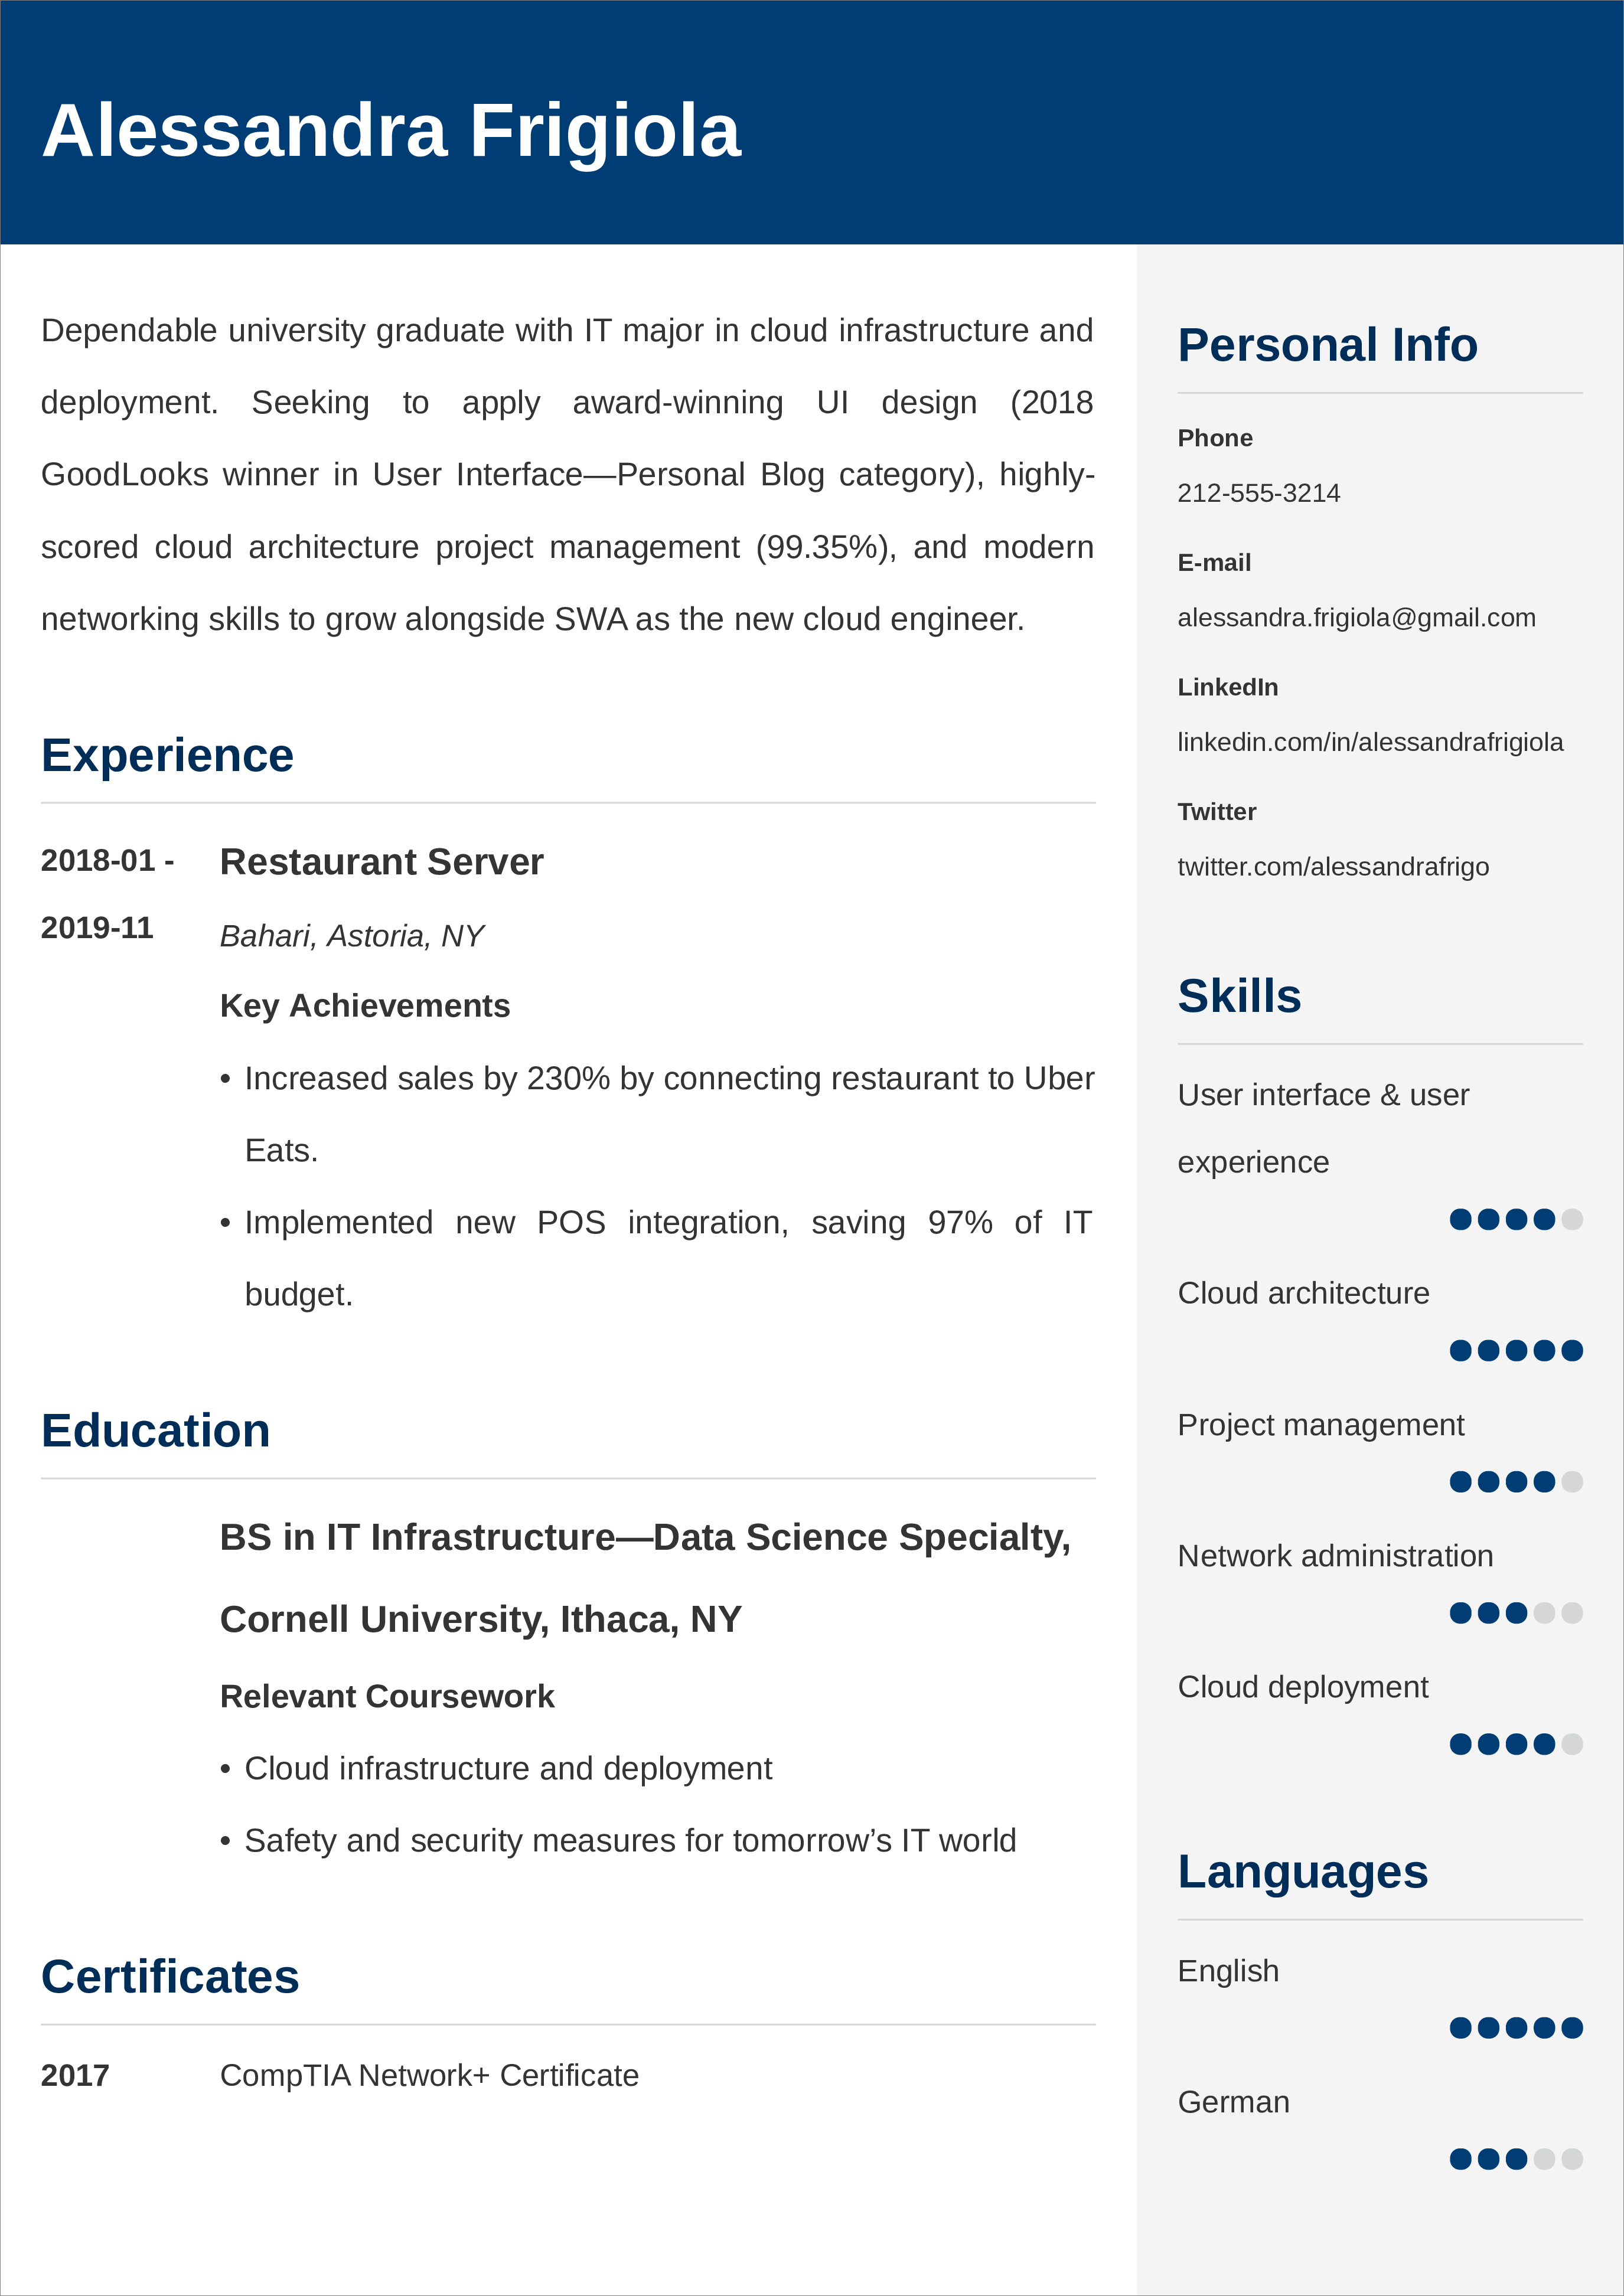 resume objective examples